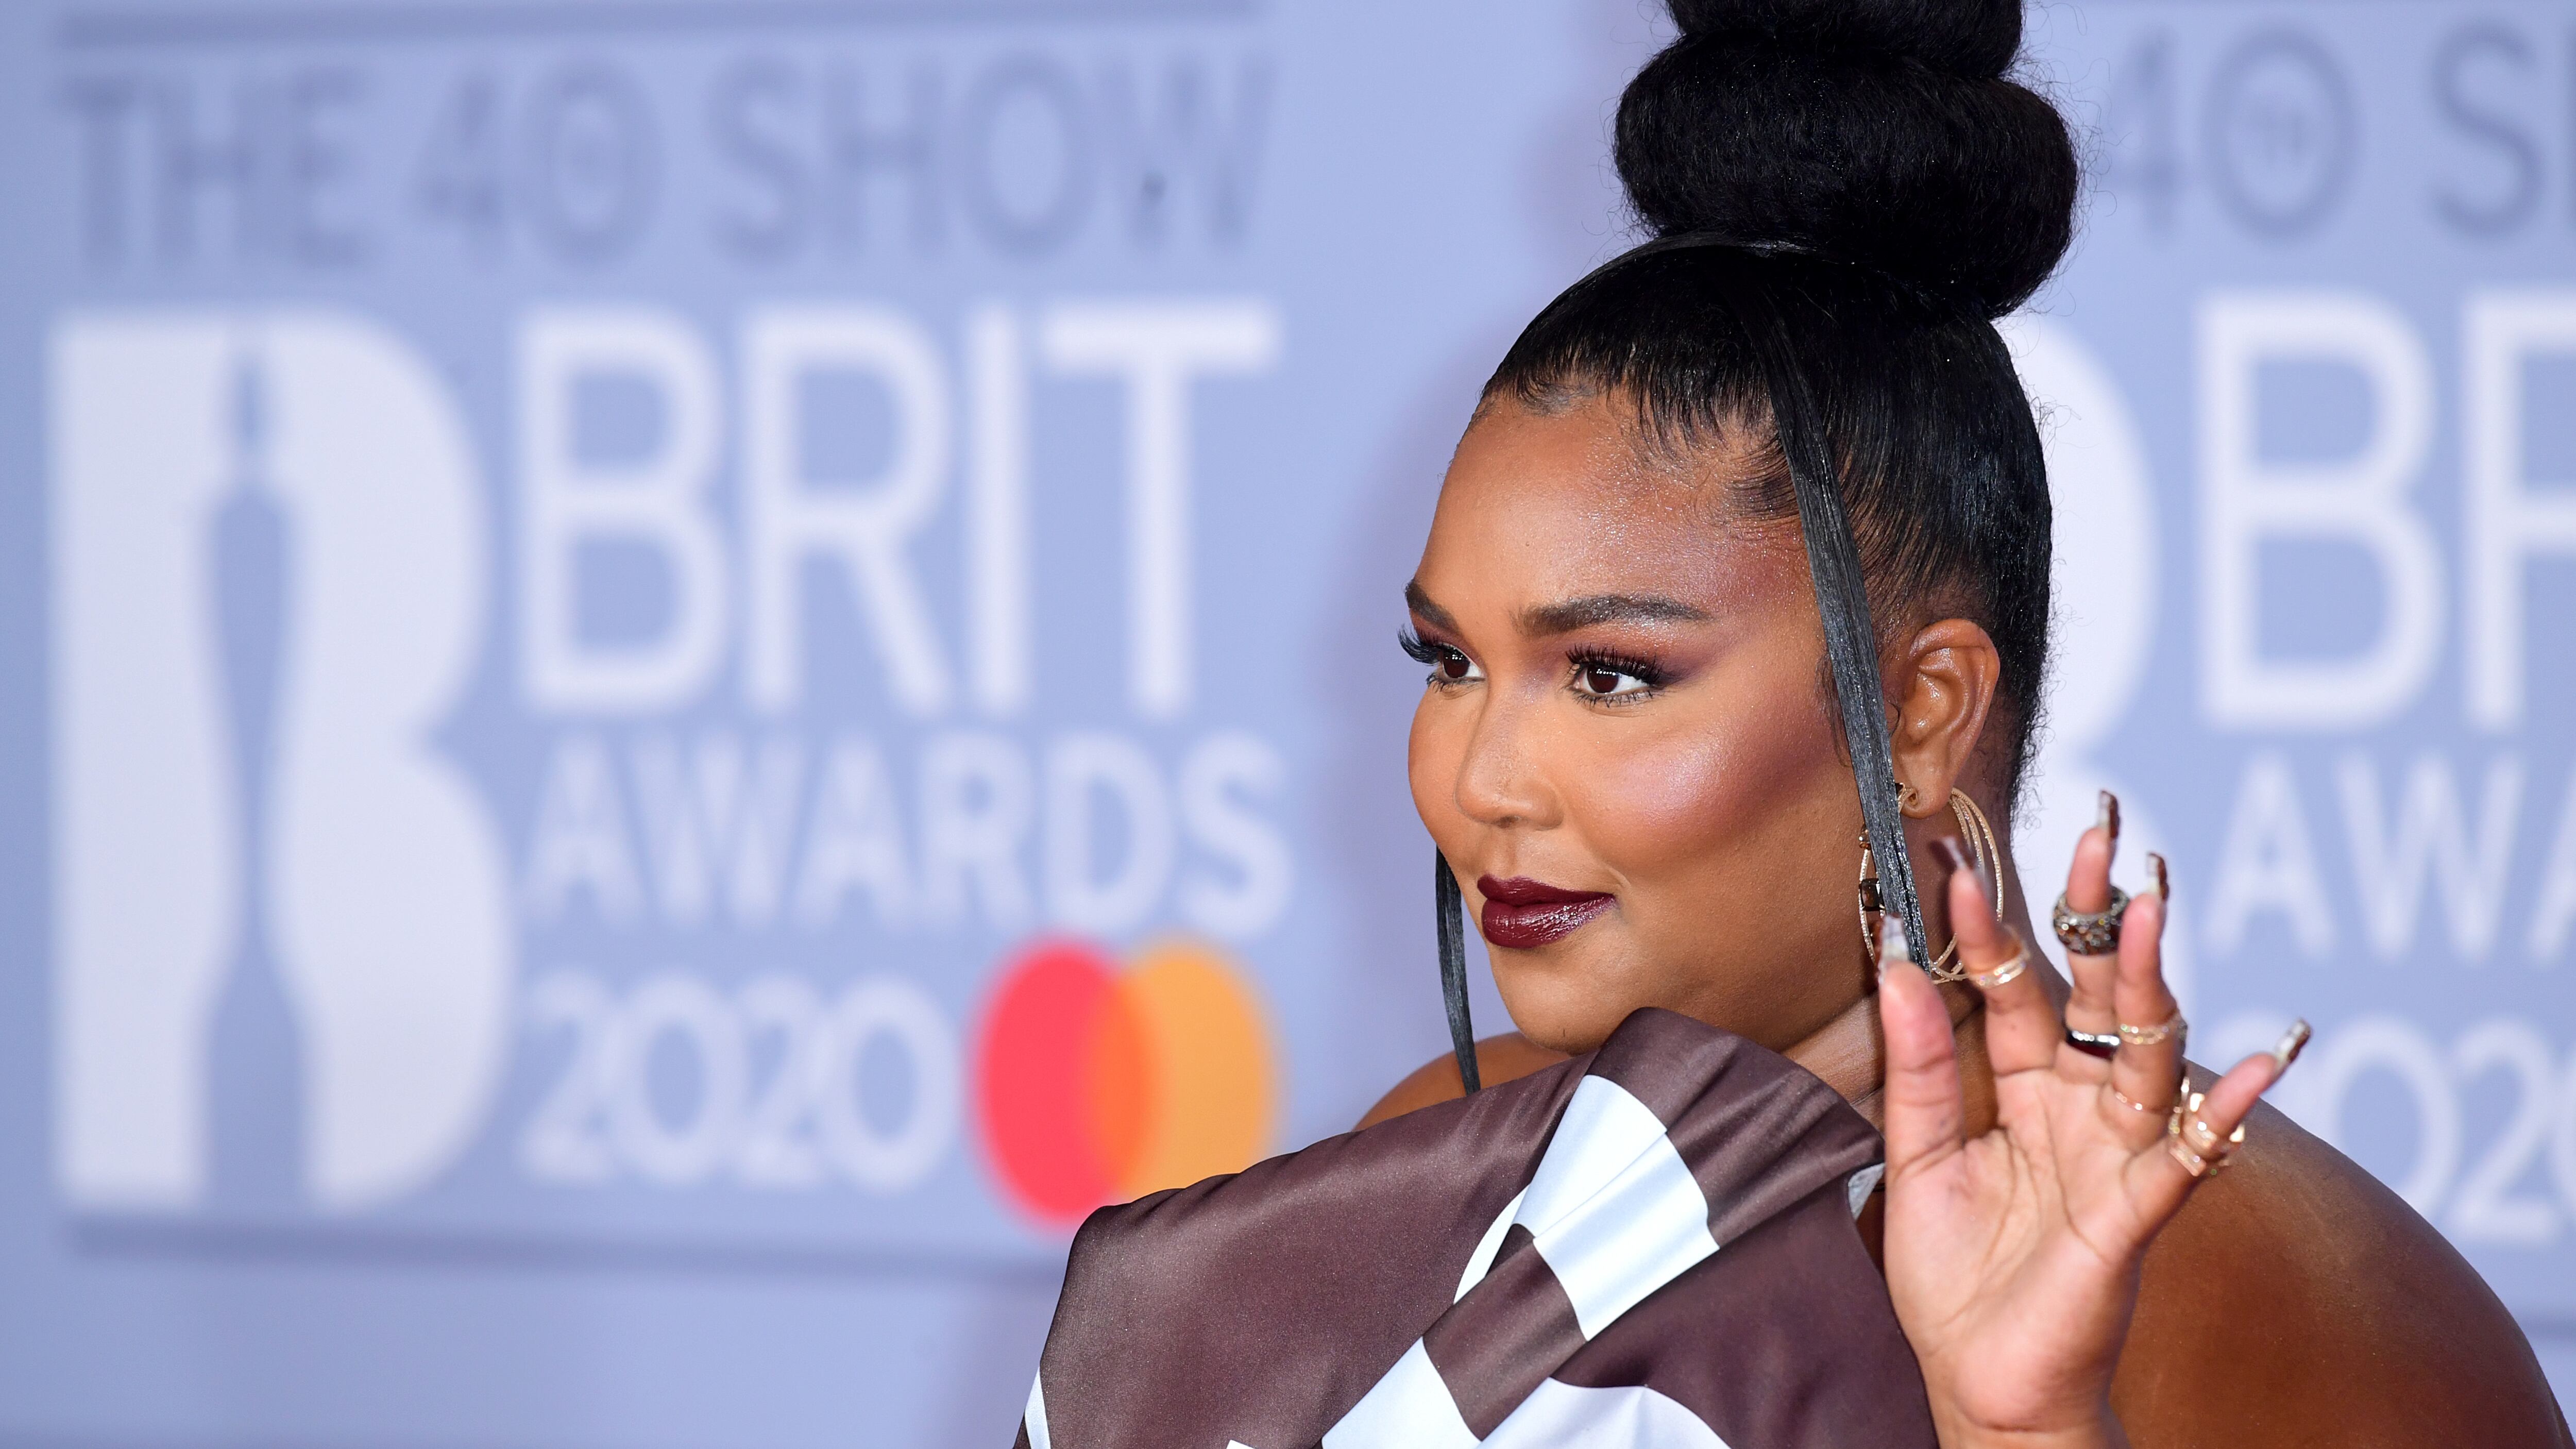 Lizzo is not quitting music industry: I quit giving ‘negative energy attention’